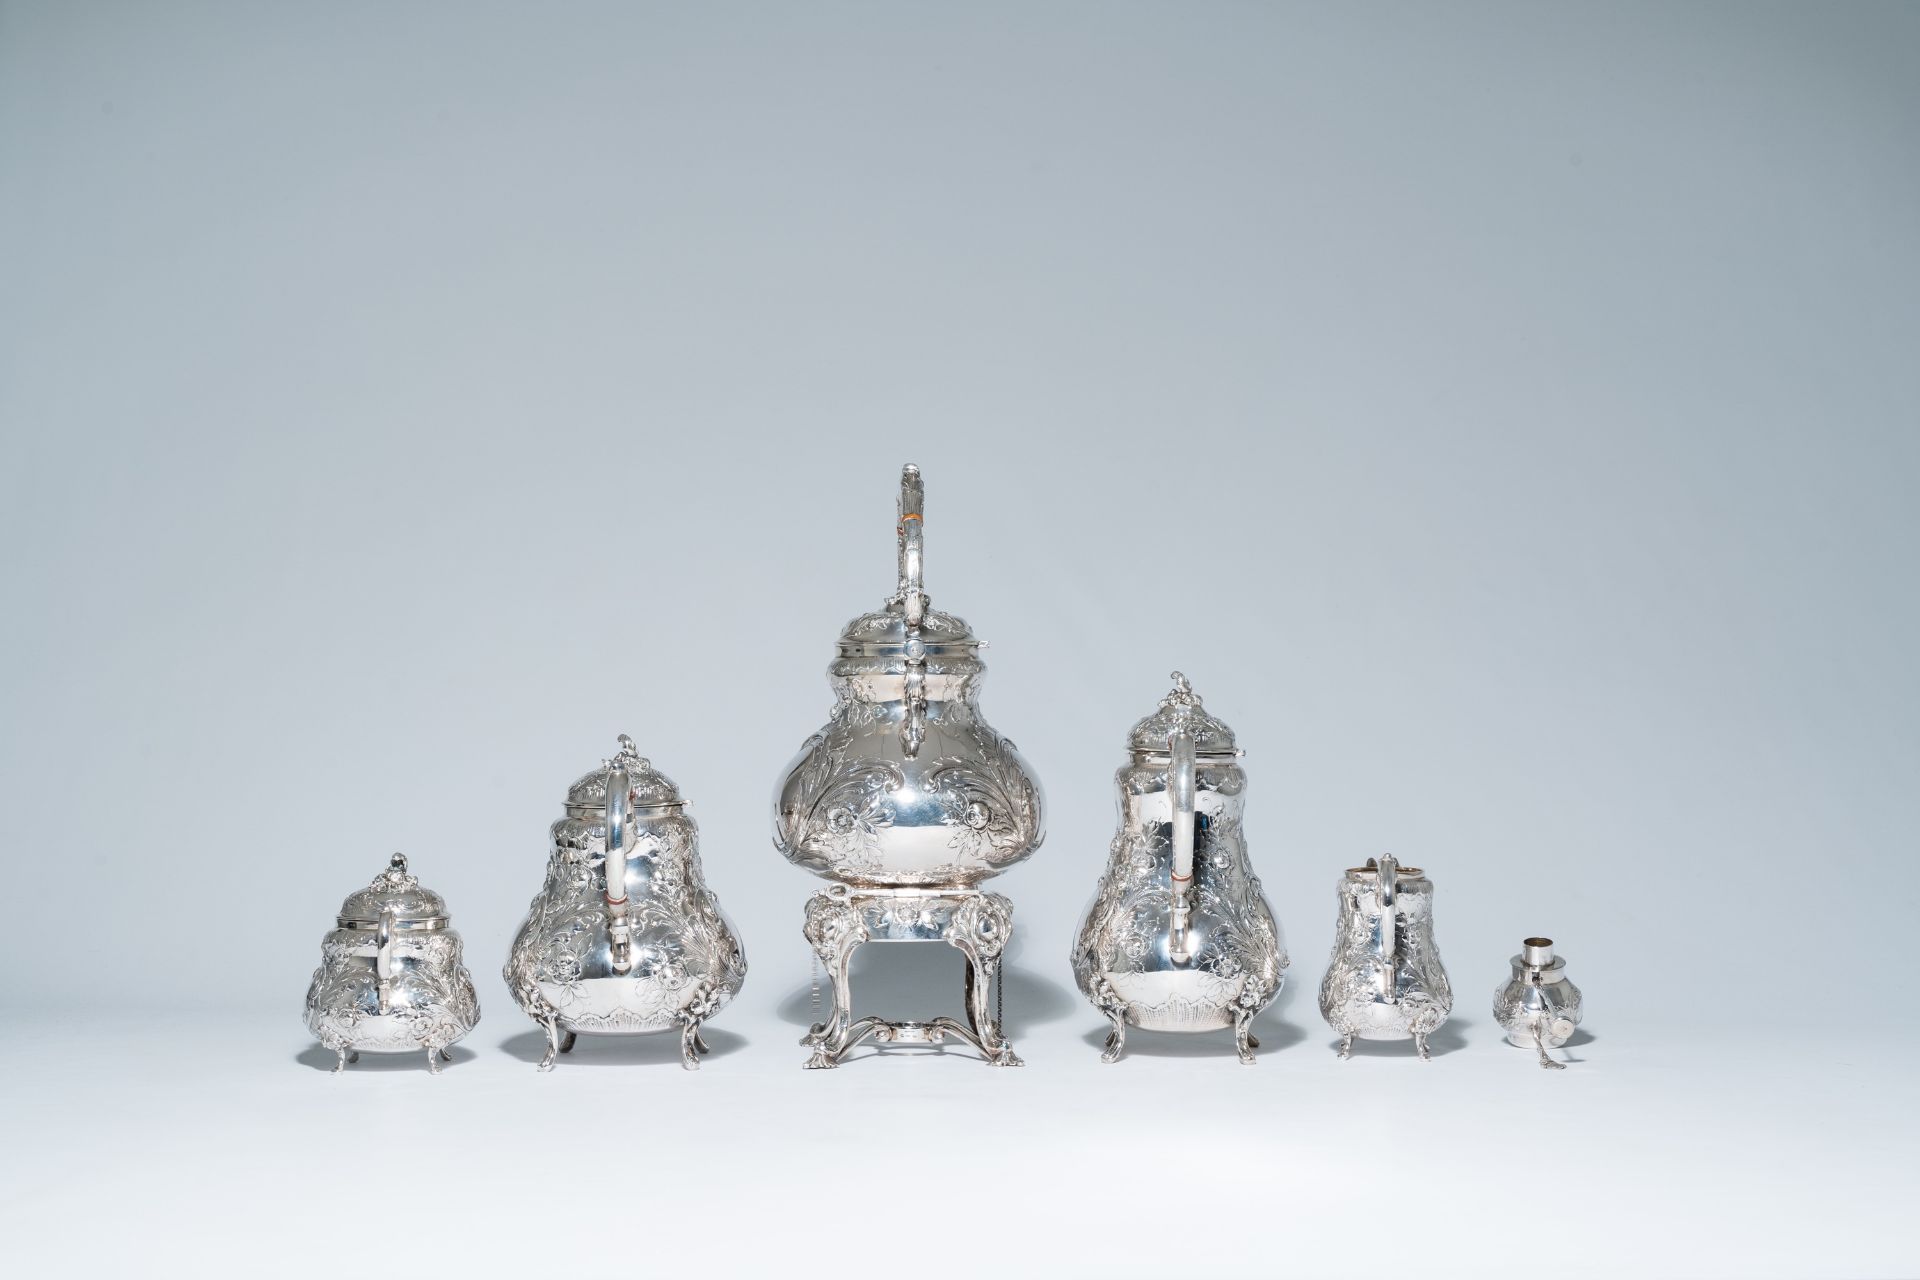 A five-piece German Rococo revival silver coffee and tea set with floral relief design, 800/000, mak - Image 5 of 20